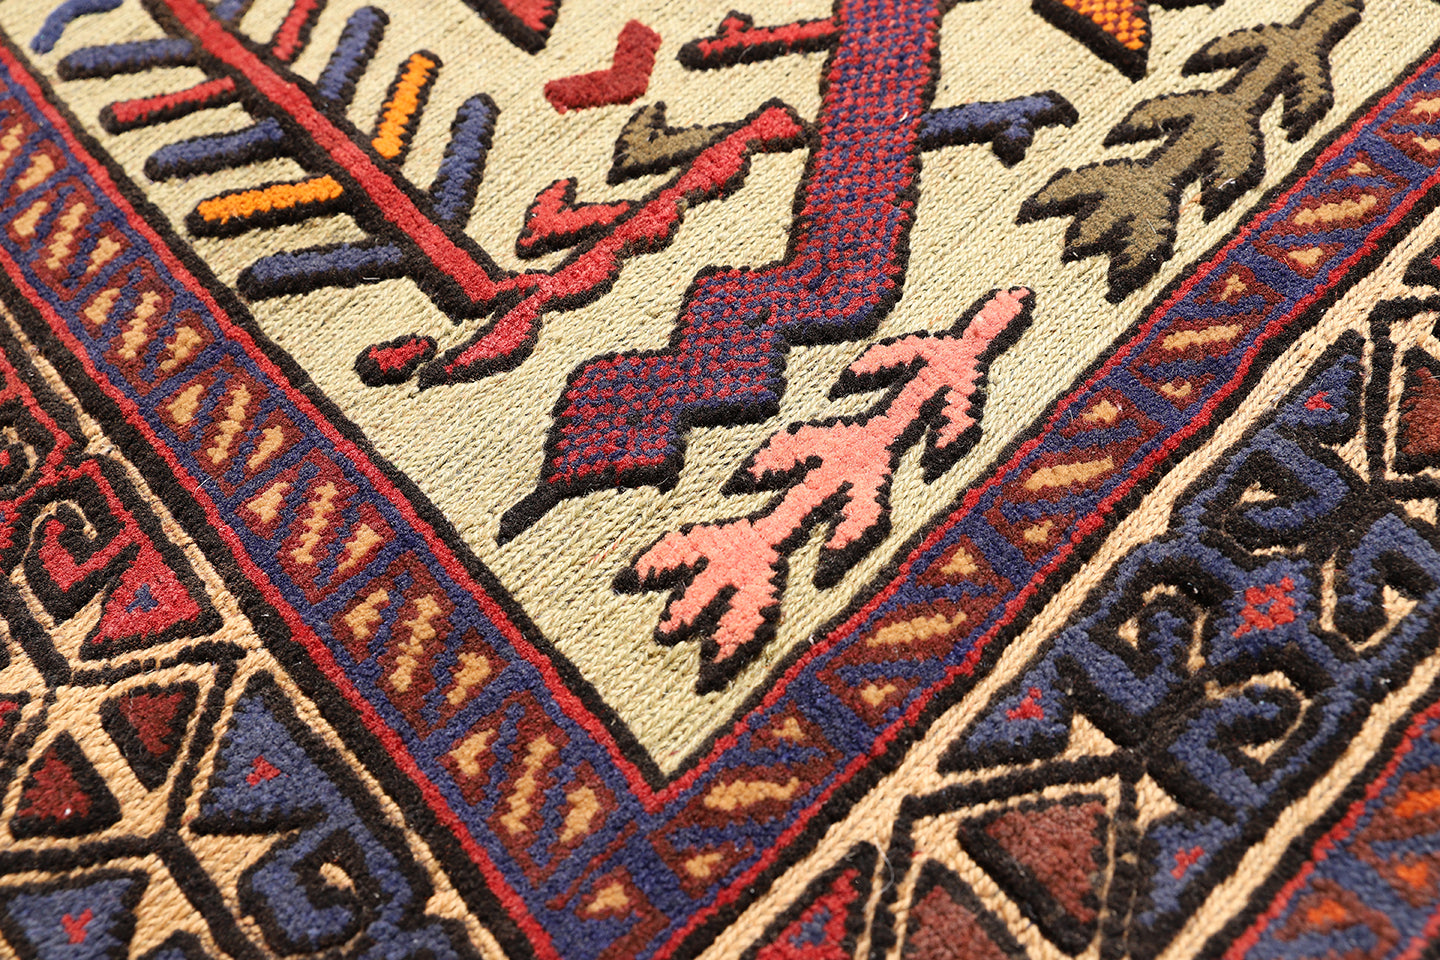 4'x5' Afghan Tribal Soumak and Knotted High Low 100% Wool Rug